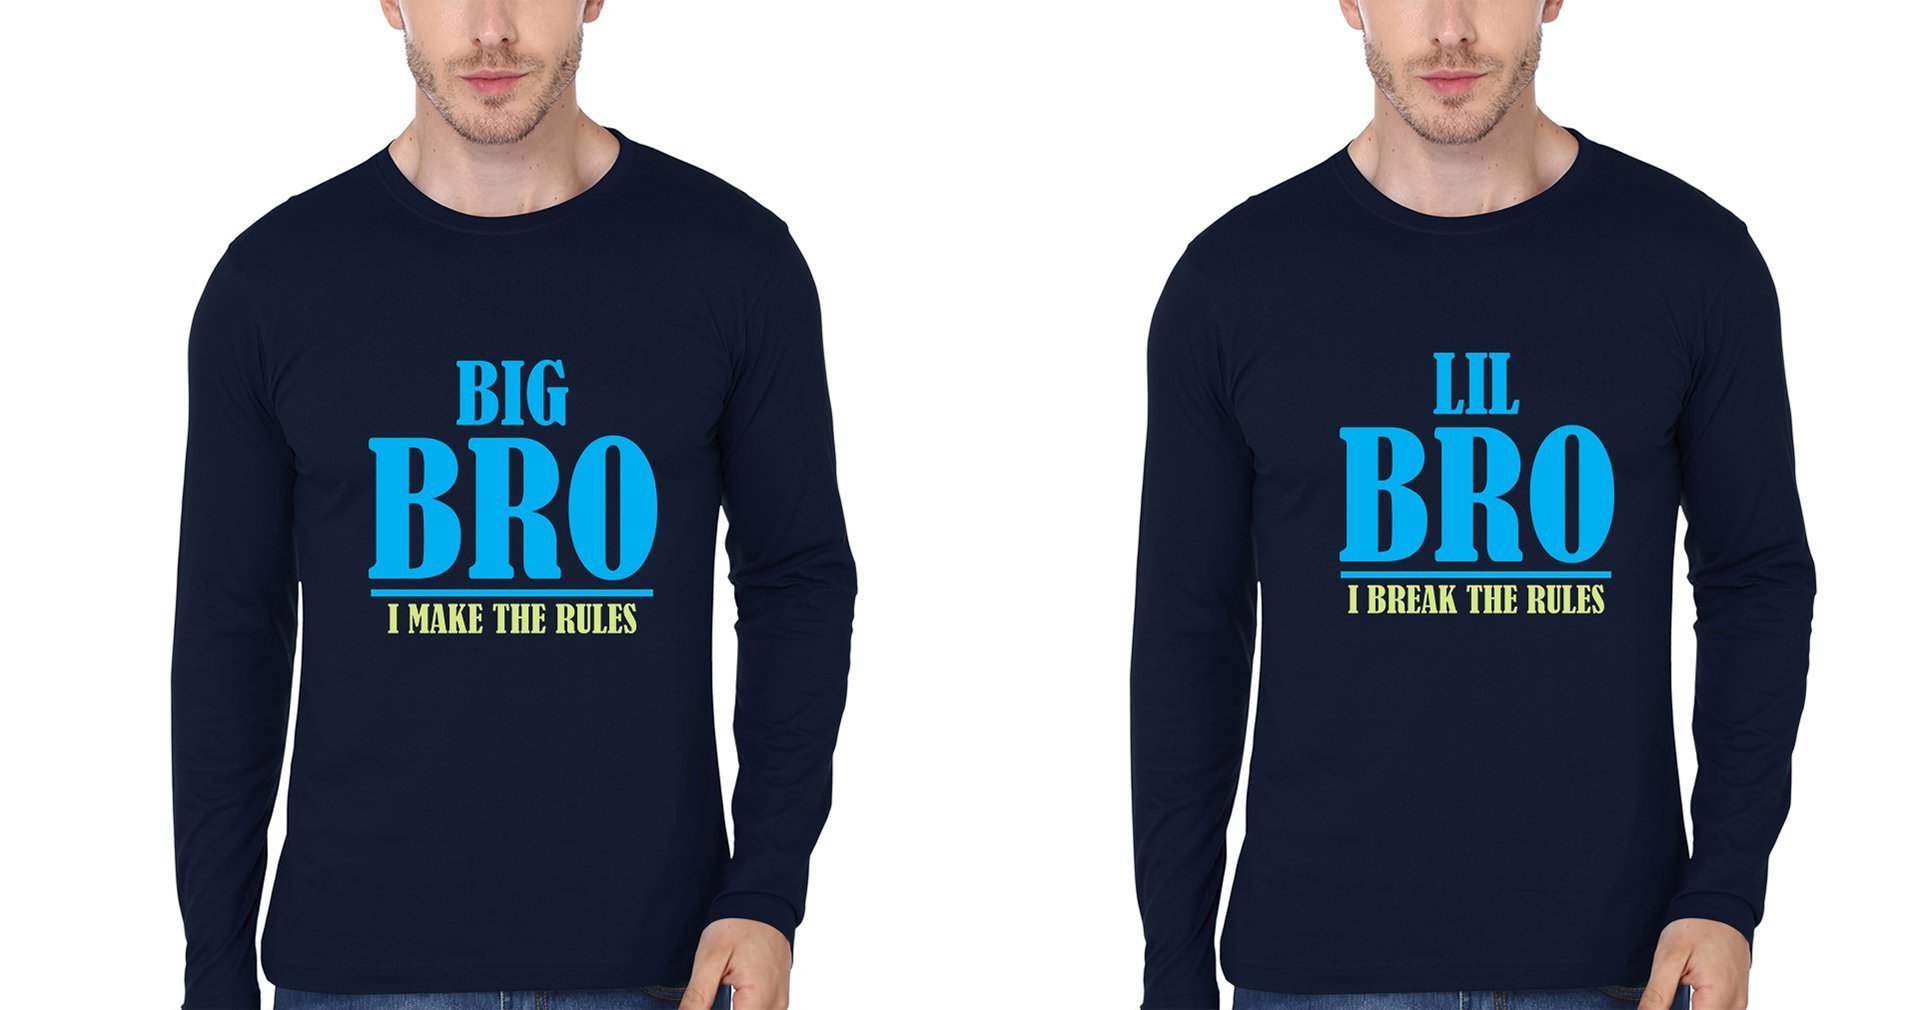 Big Bro Make Rule Lil Bro Break Rule Brother-Brother Full Sleeves T-Shirts -FunkyTradition - FunkyTradition